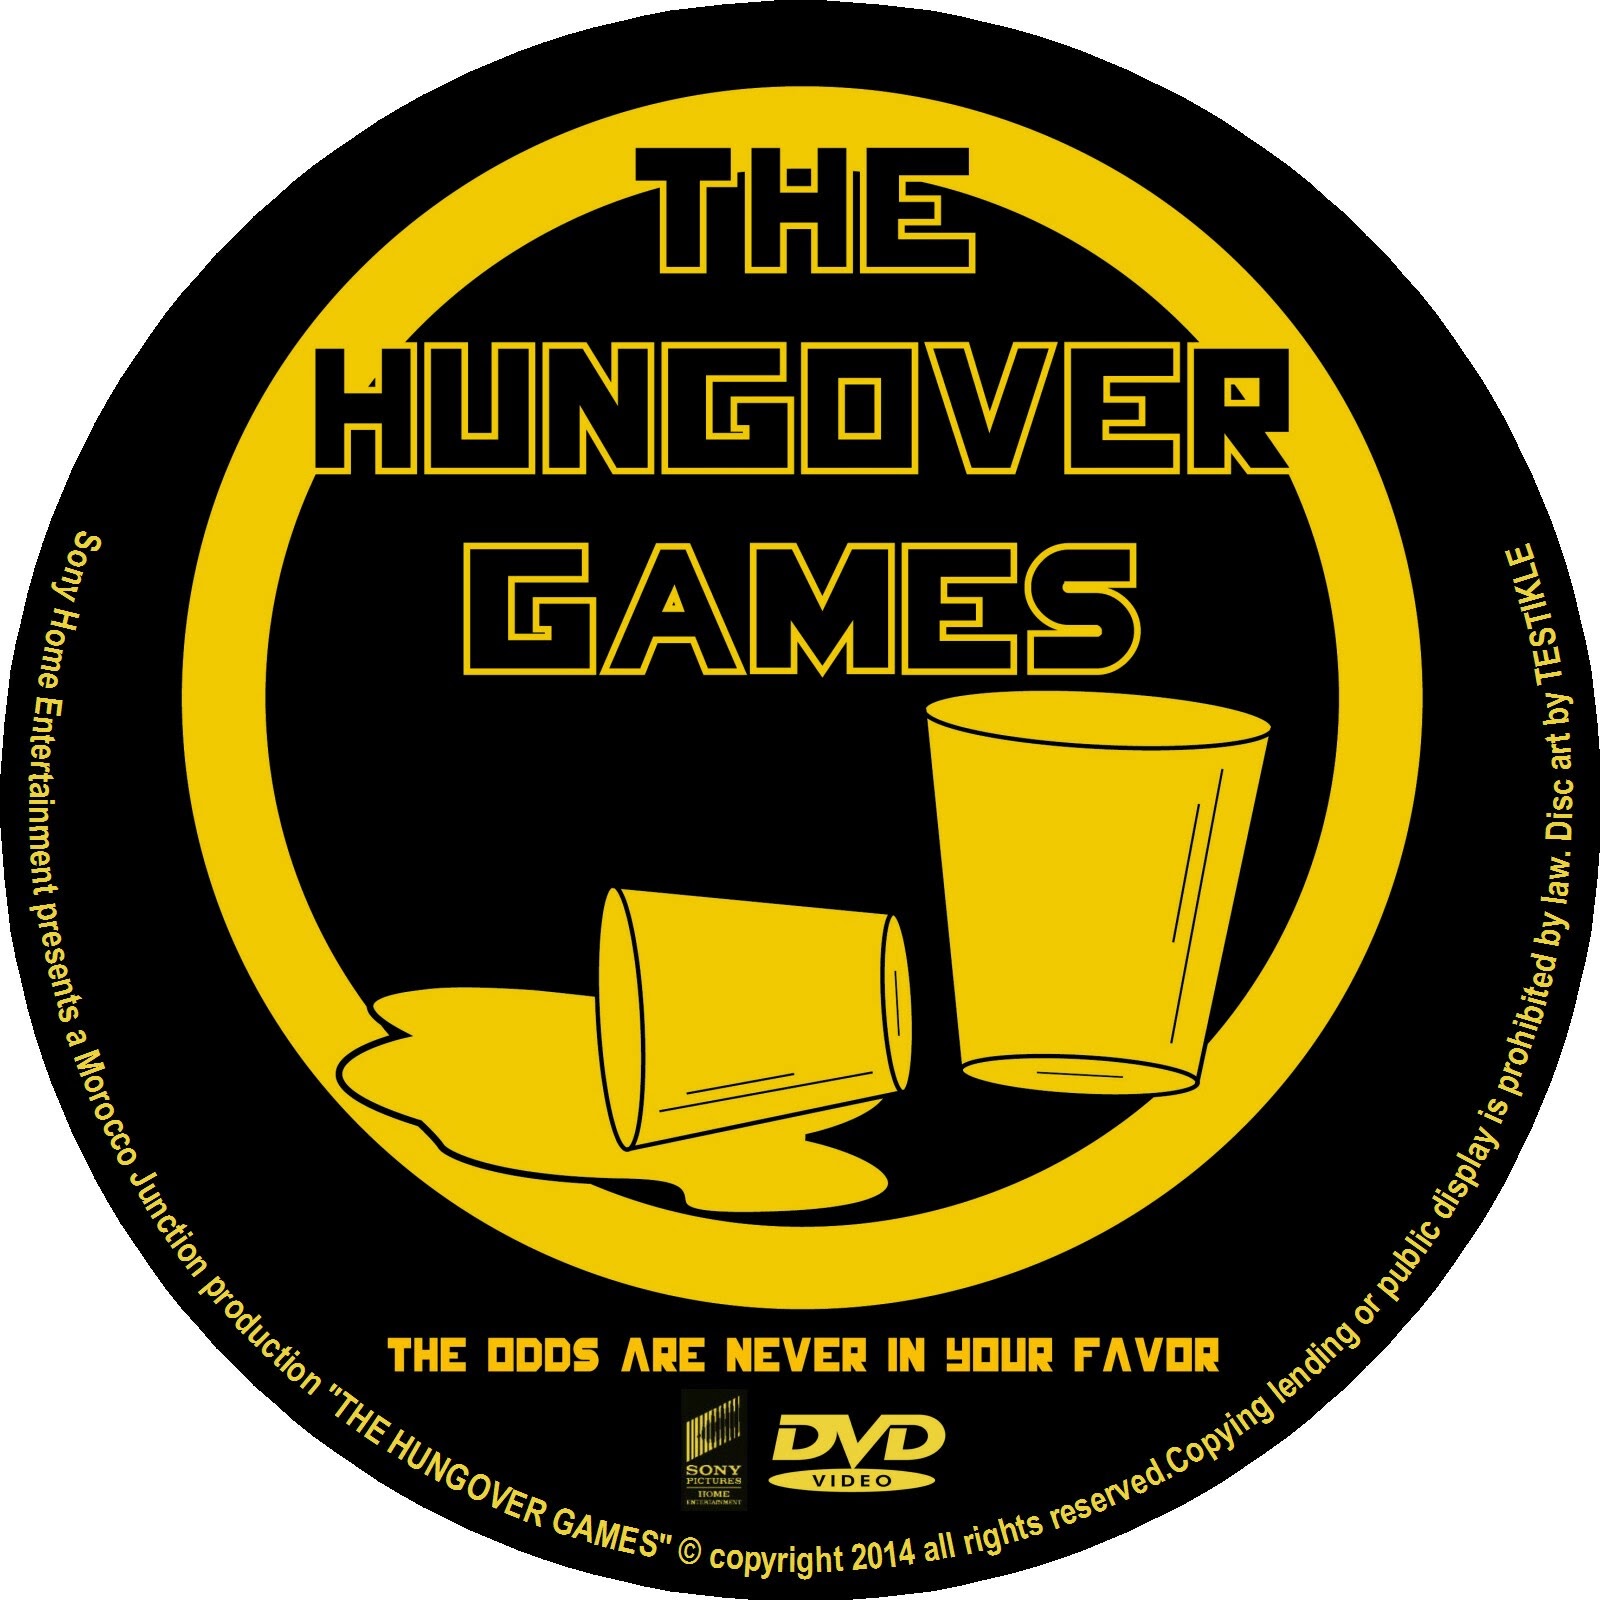 Hung Over Games DVD Cover